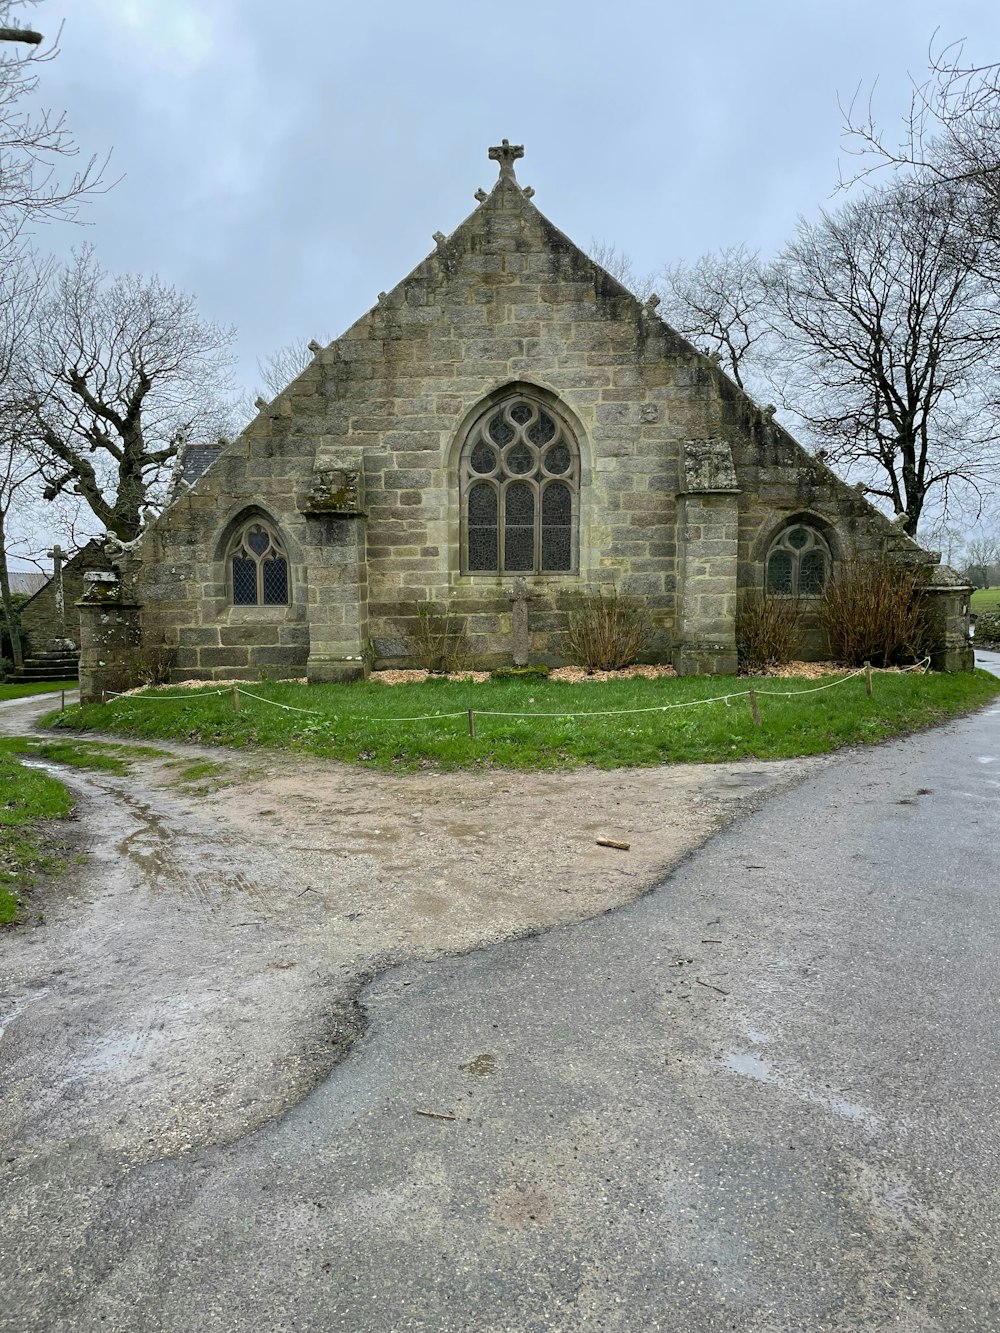 an old stone church with a cross on the front